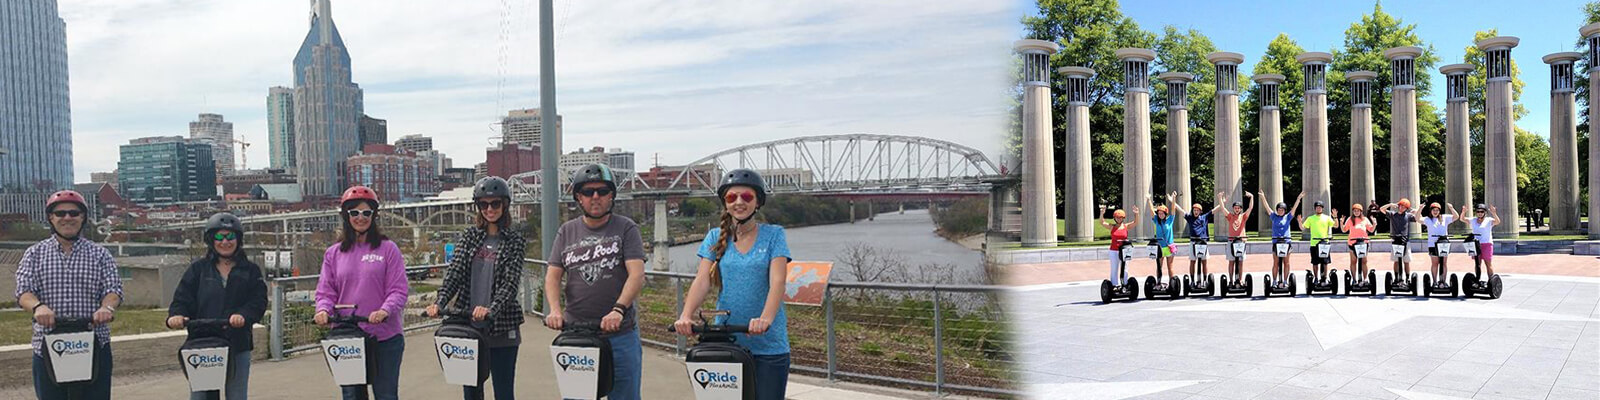 Downtown Segway Tour Experience Coupons